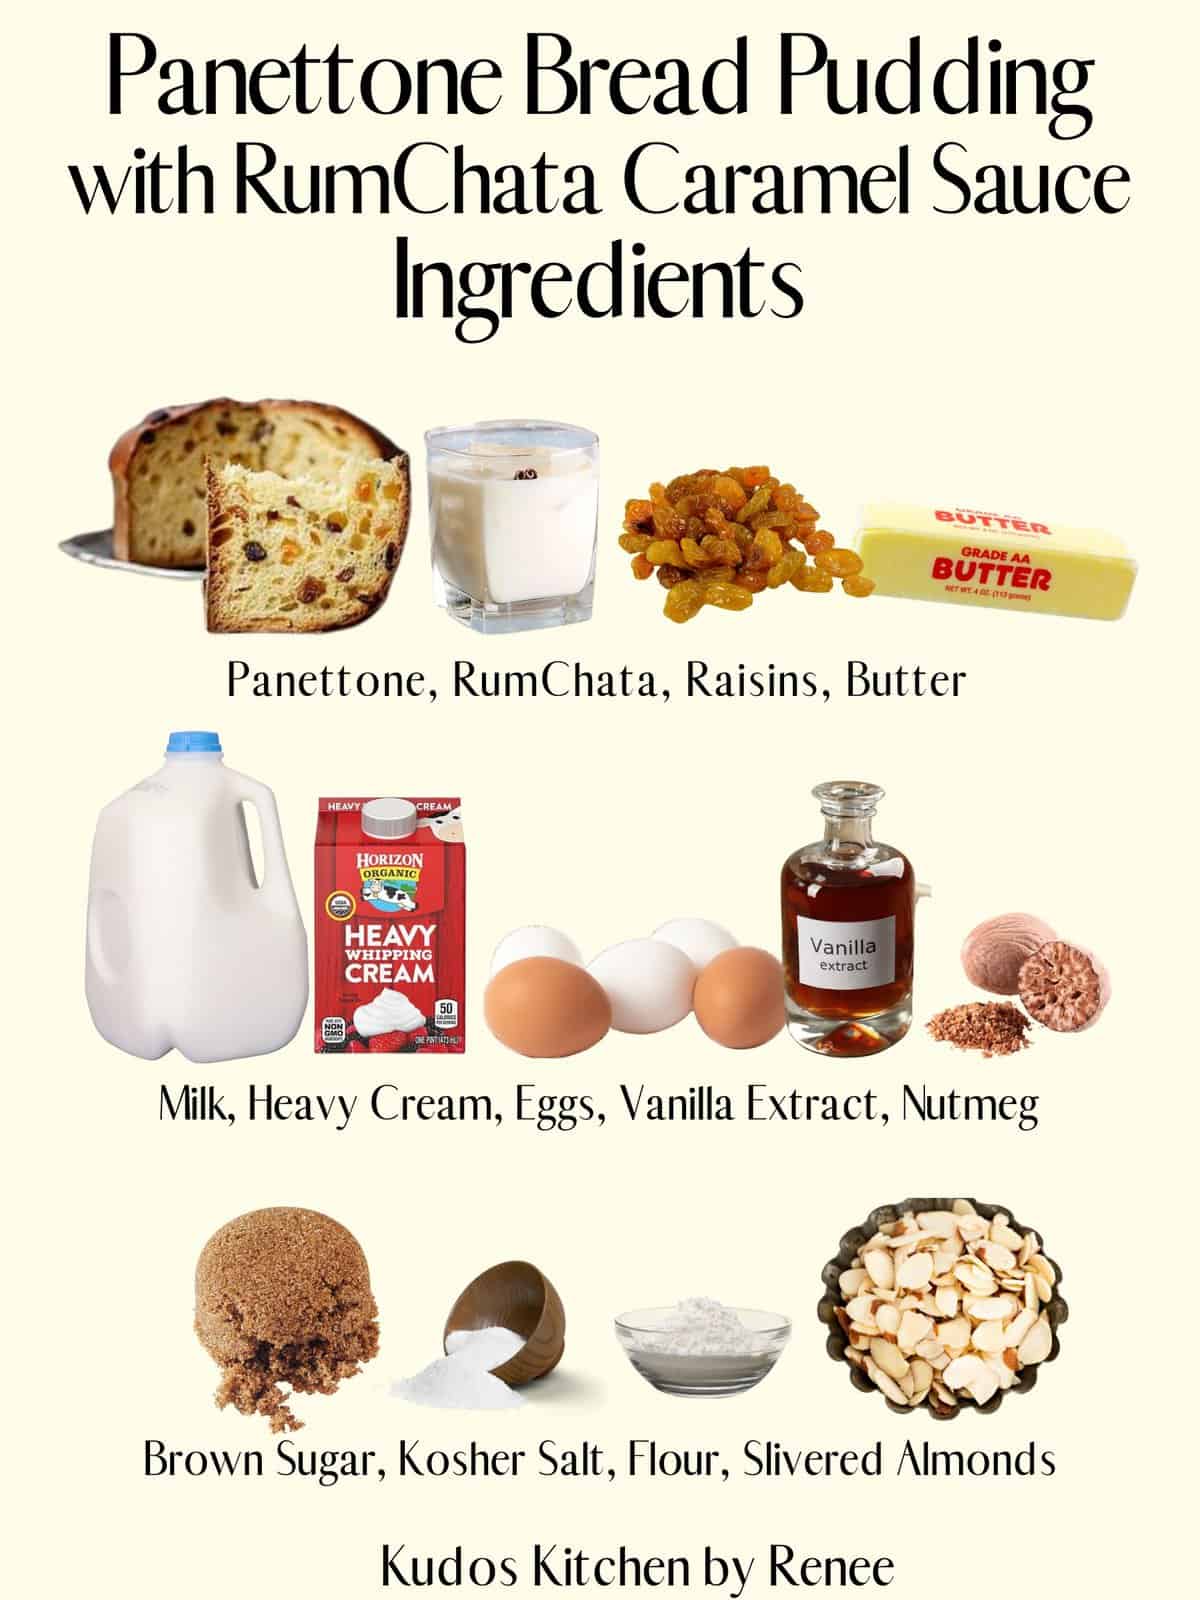 A visual ingredient list for makine Panettone Bread Pudding with RumChata Sauce.